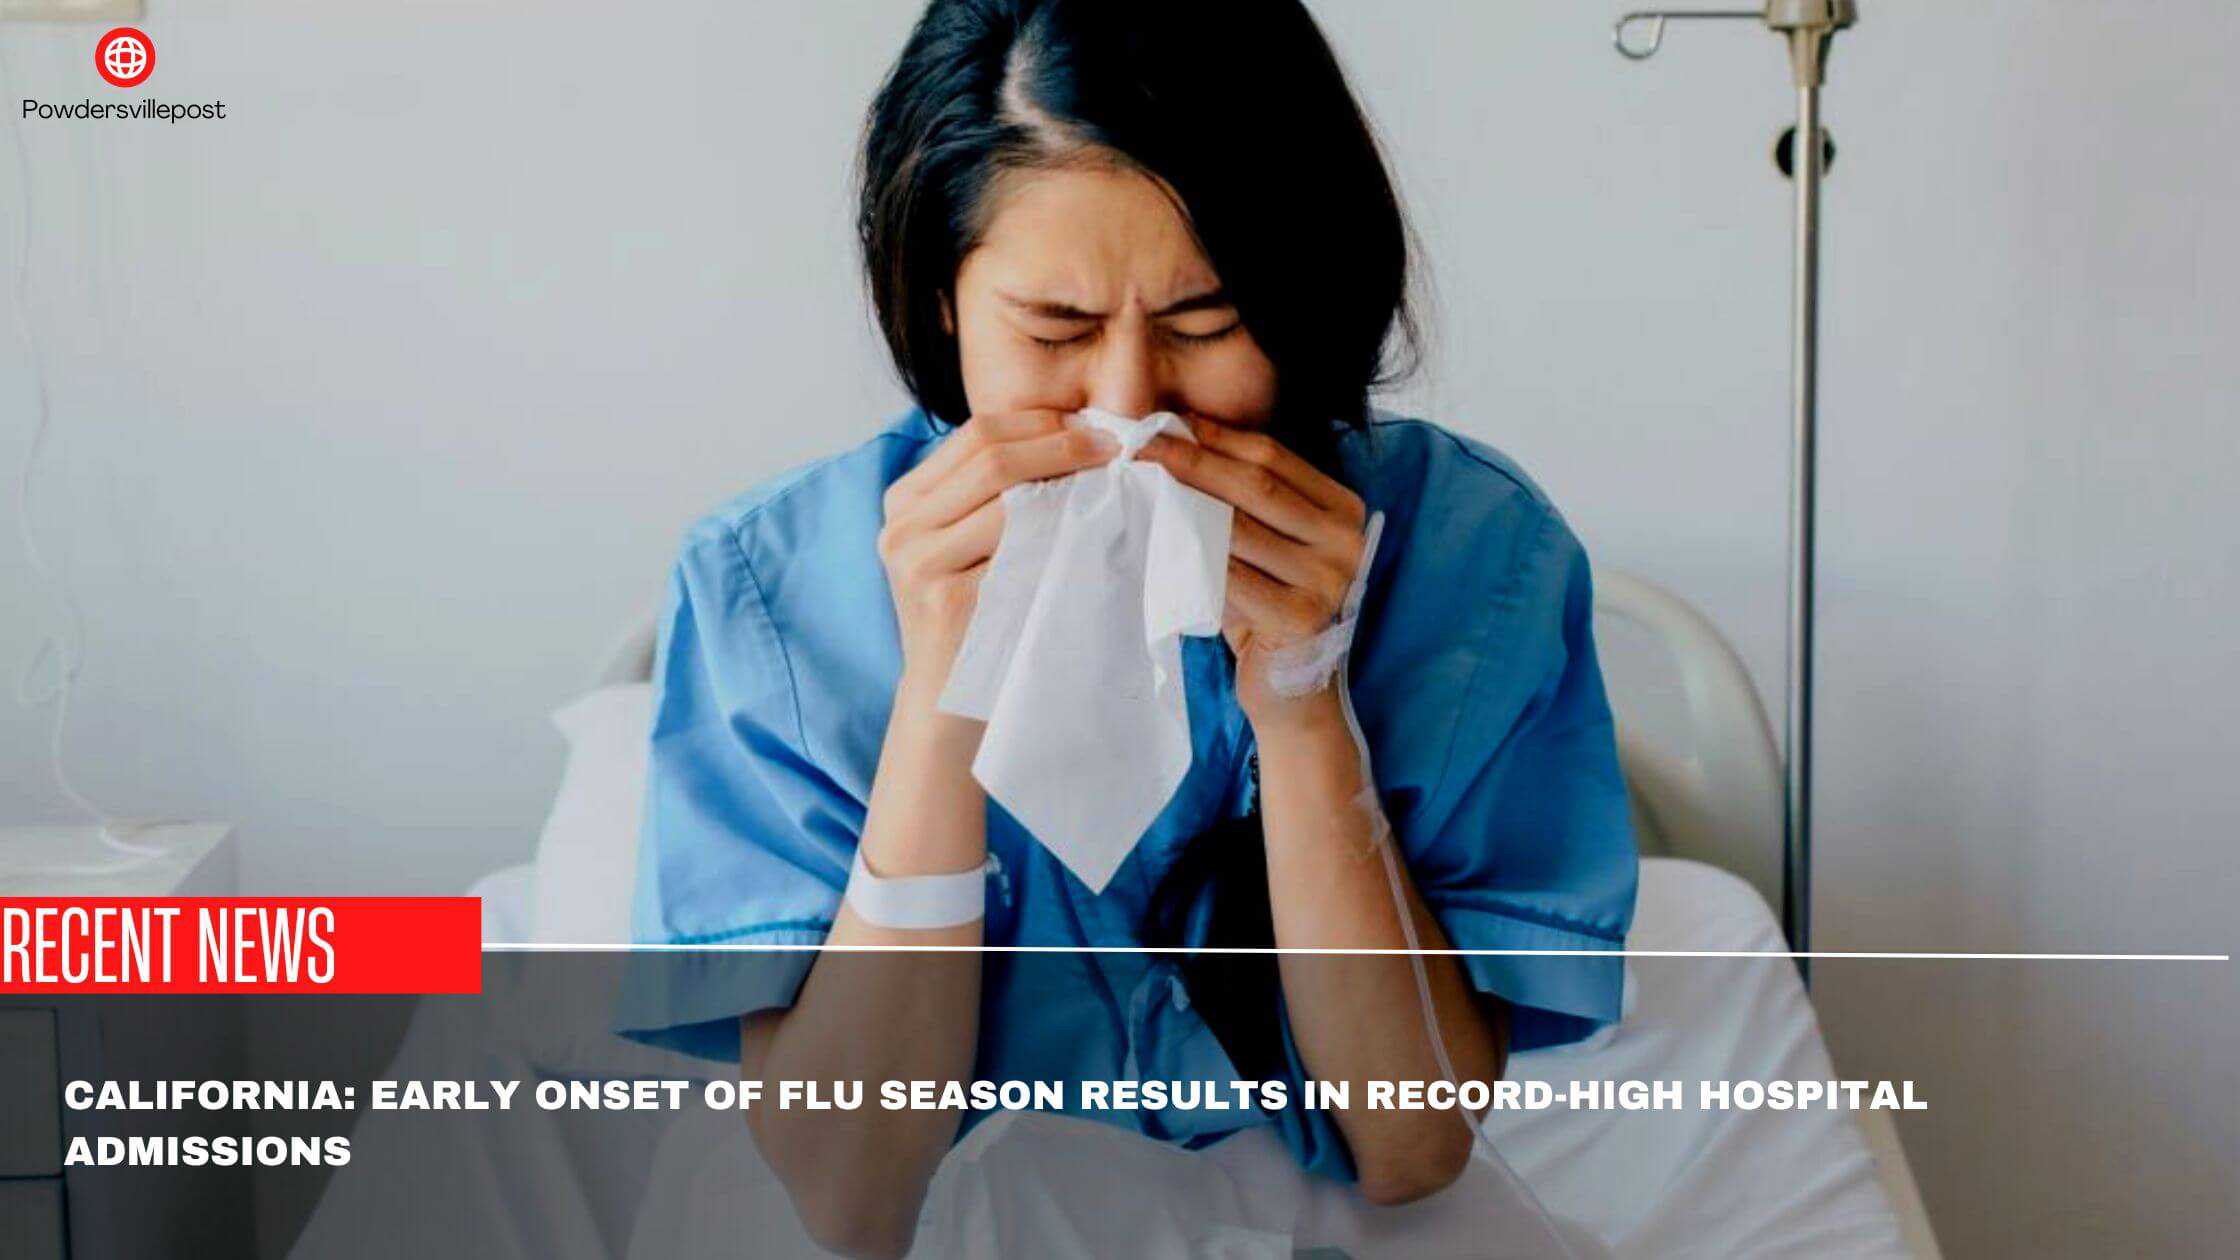 California Early Onset Of Flu Season Results In Record-High Hospital Admissions